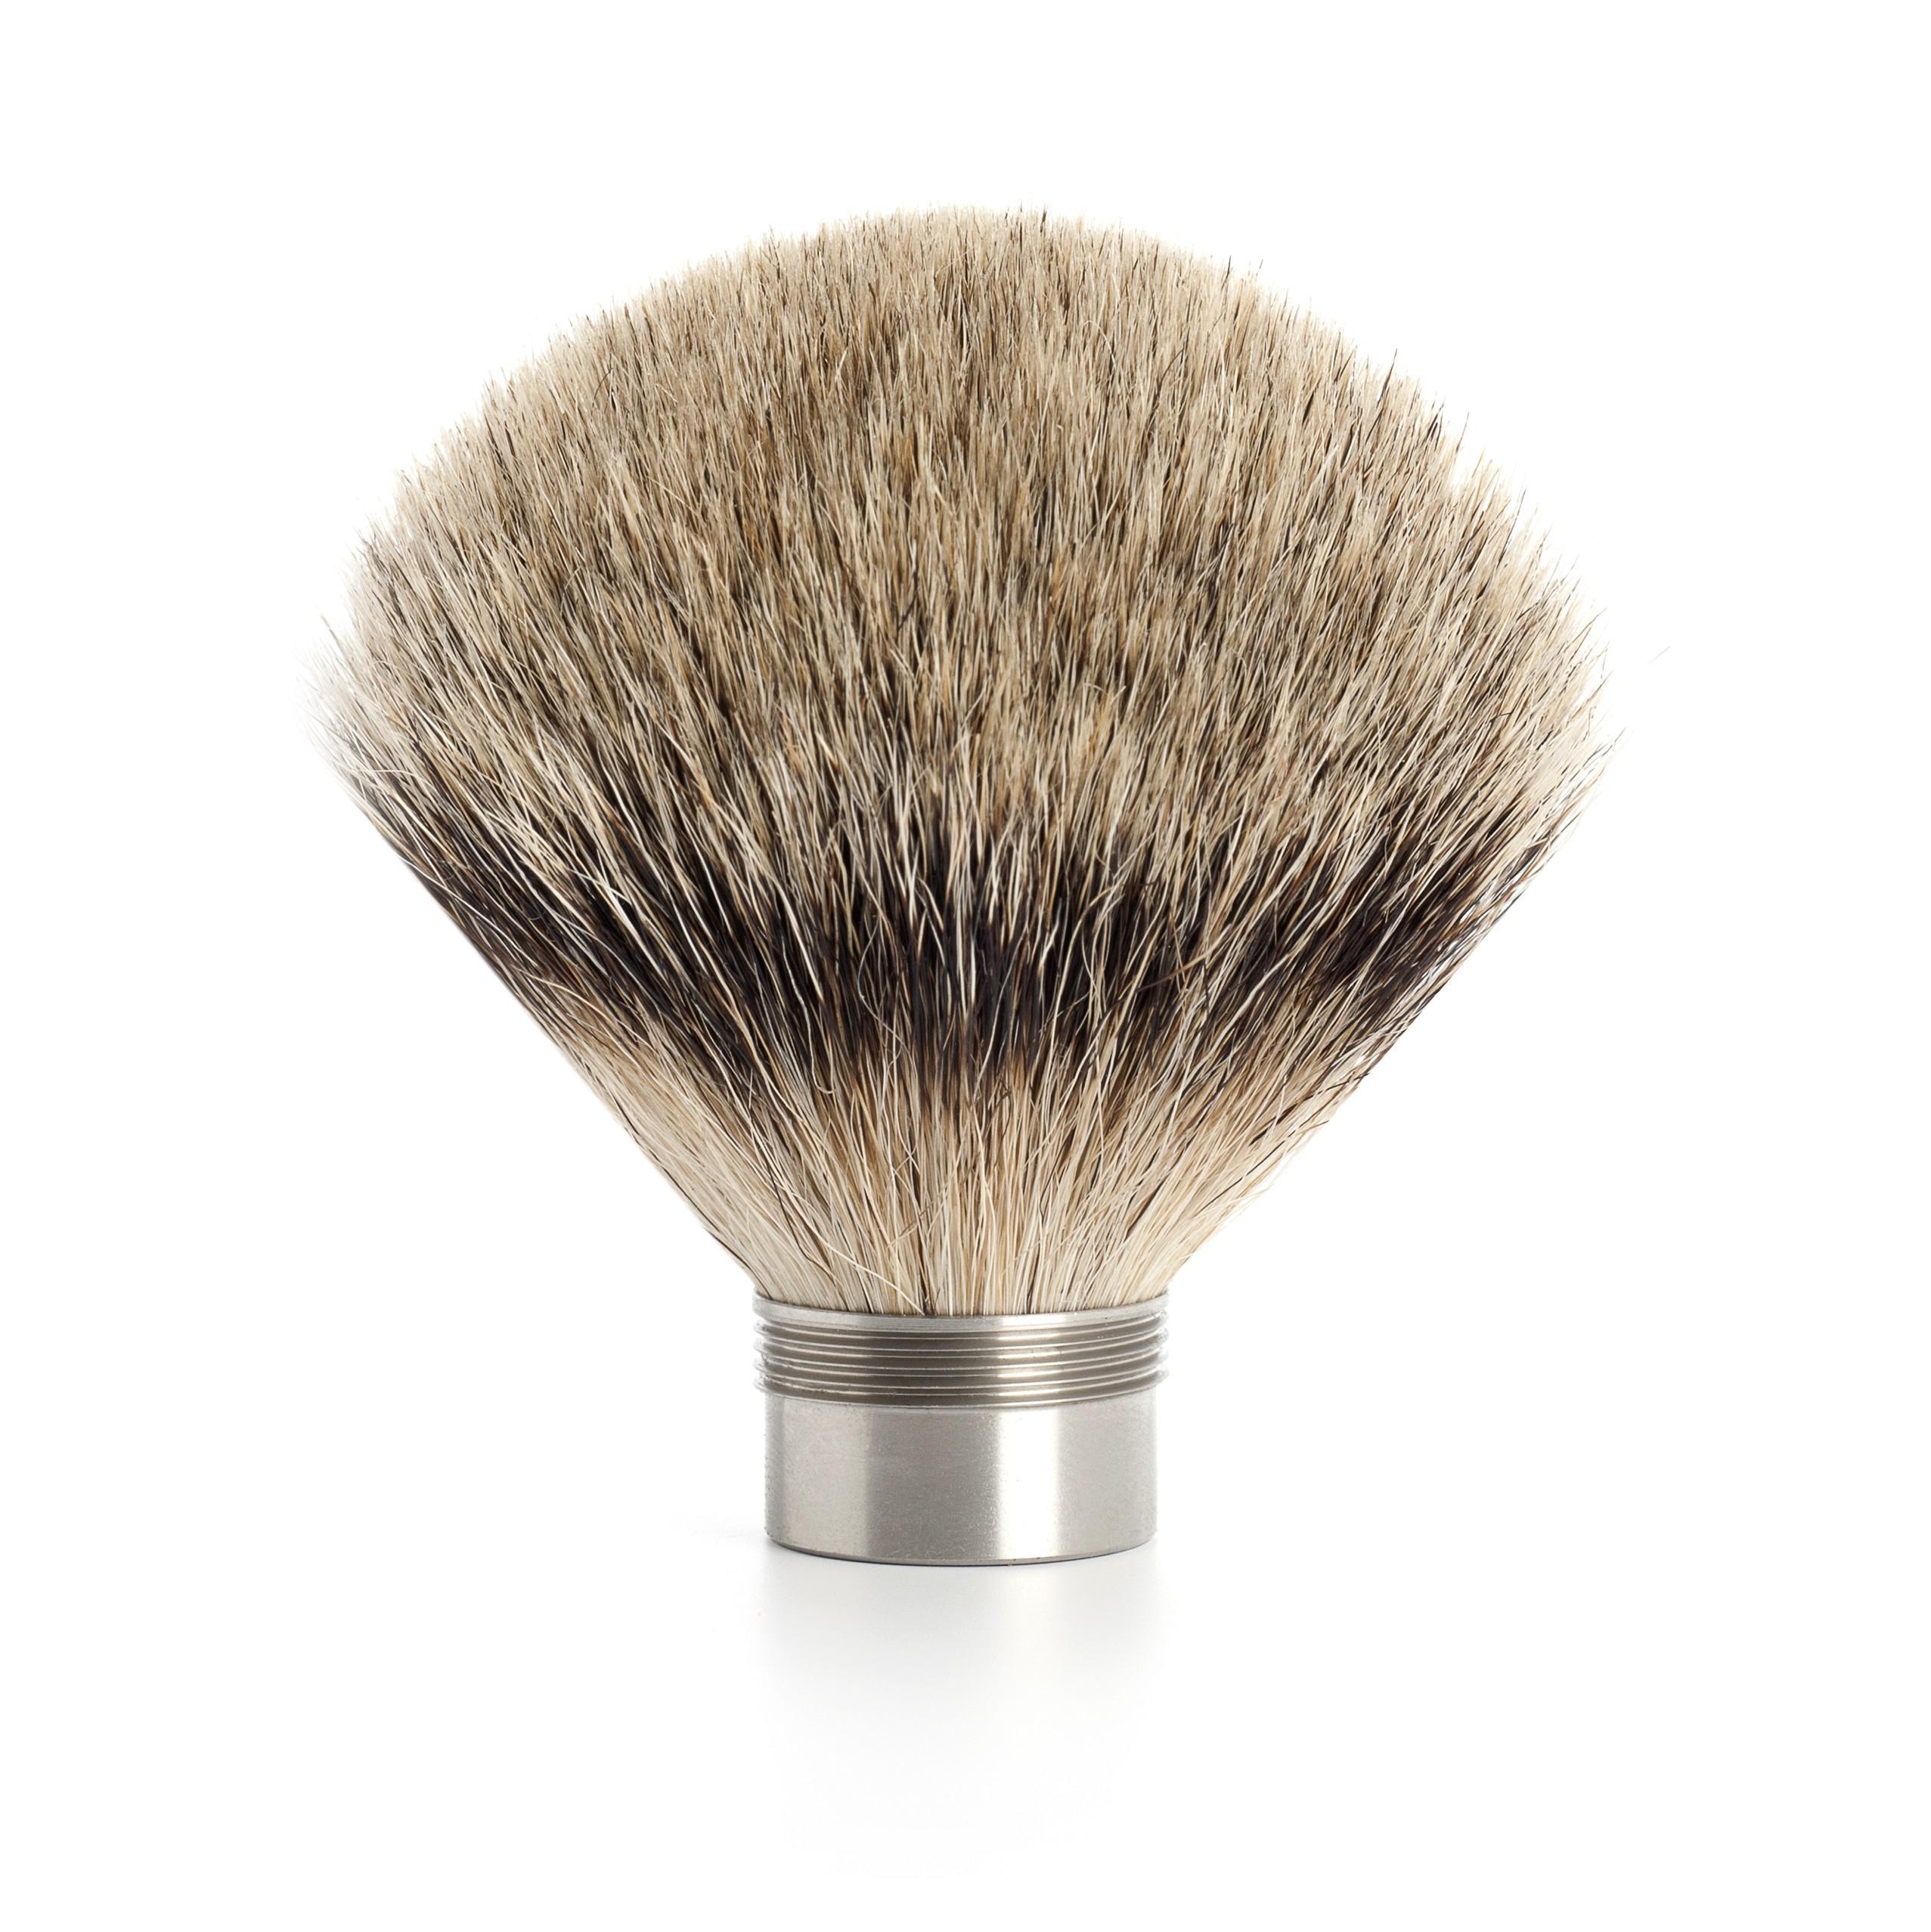 493 MÜHLE Replacement Silvertip Badger Brush Head for EDITION series